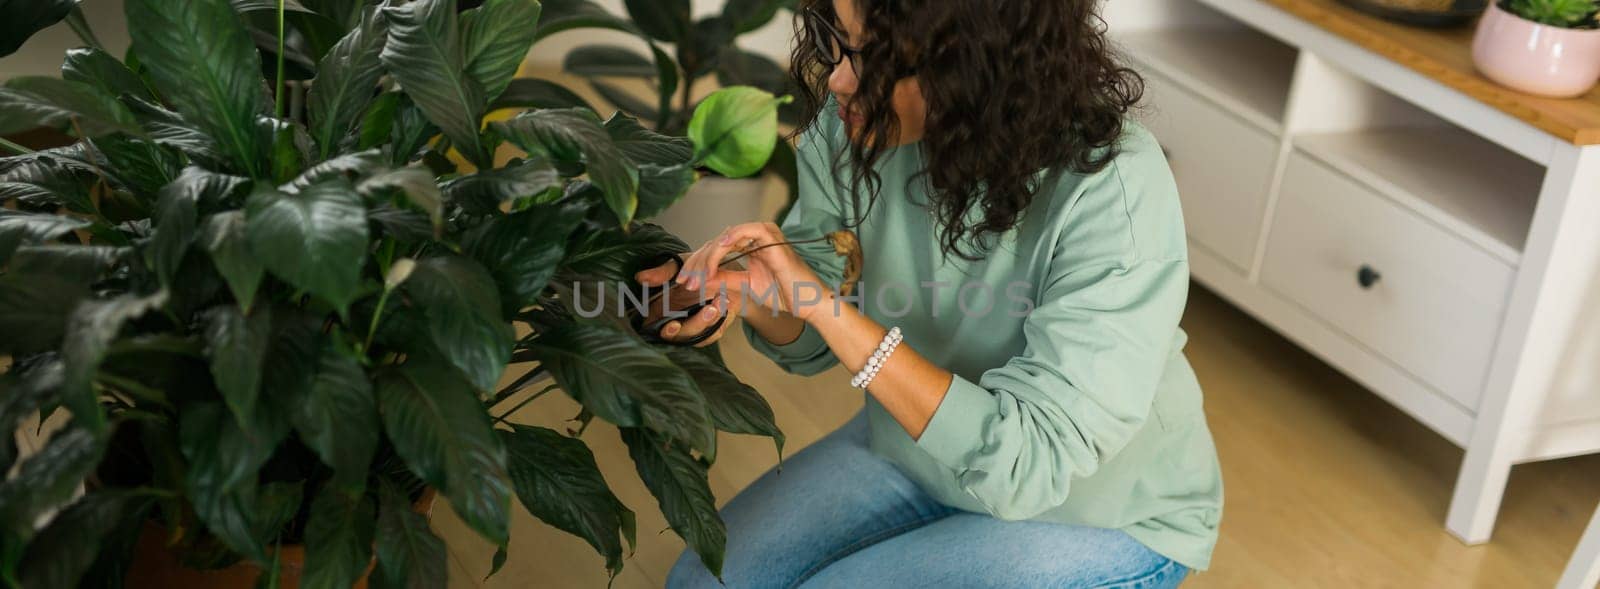 Smiling young woman and pot with plant happy work in indoor garden or cozy home office with different houseplants. Happy millennial female gardener florist take care of domestic flower